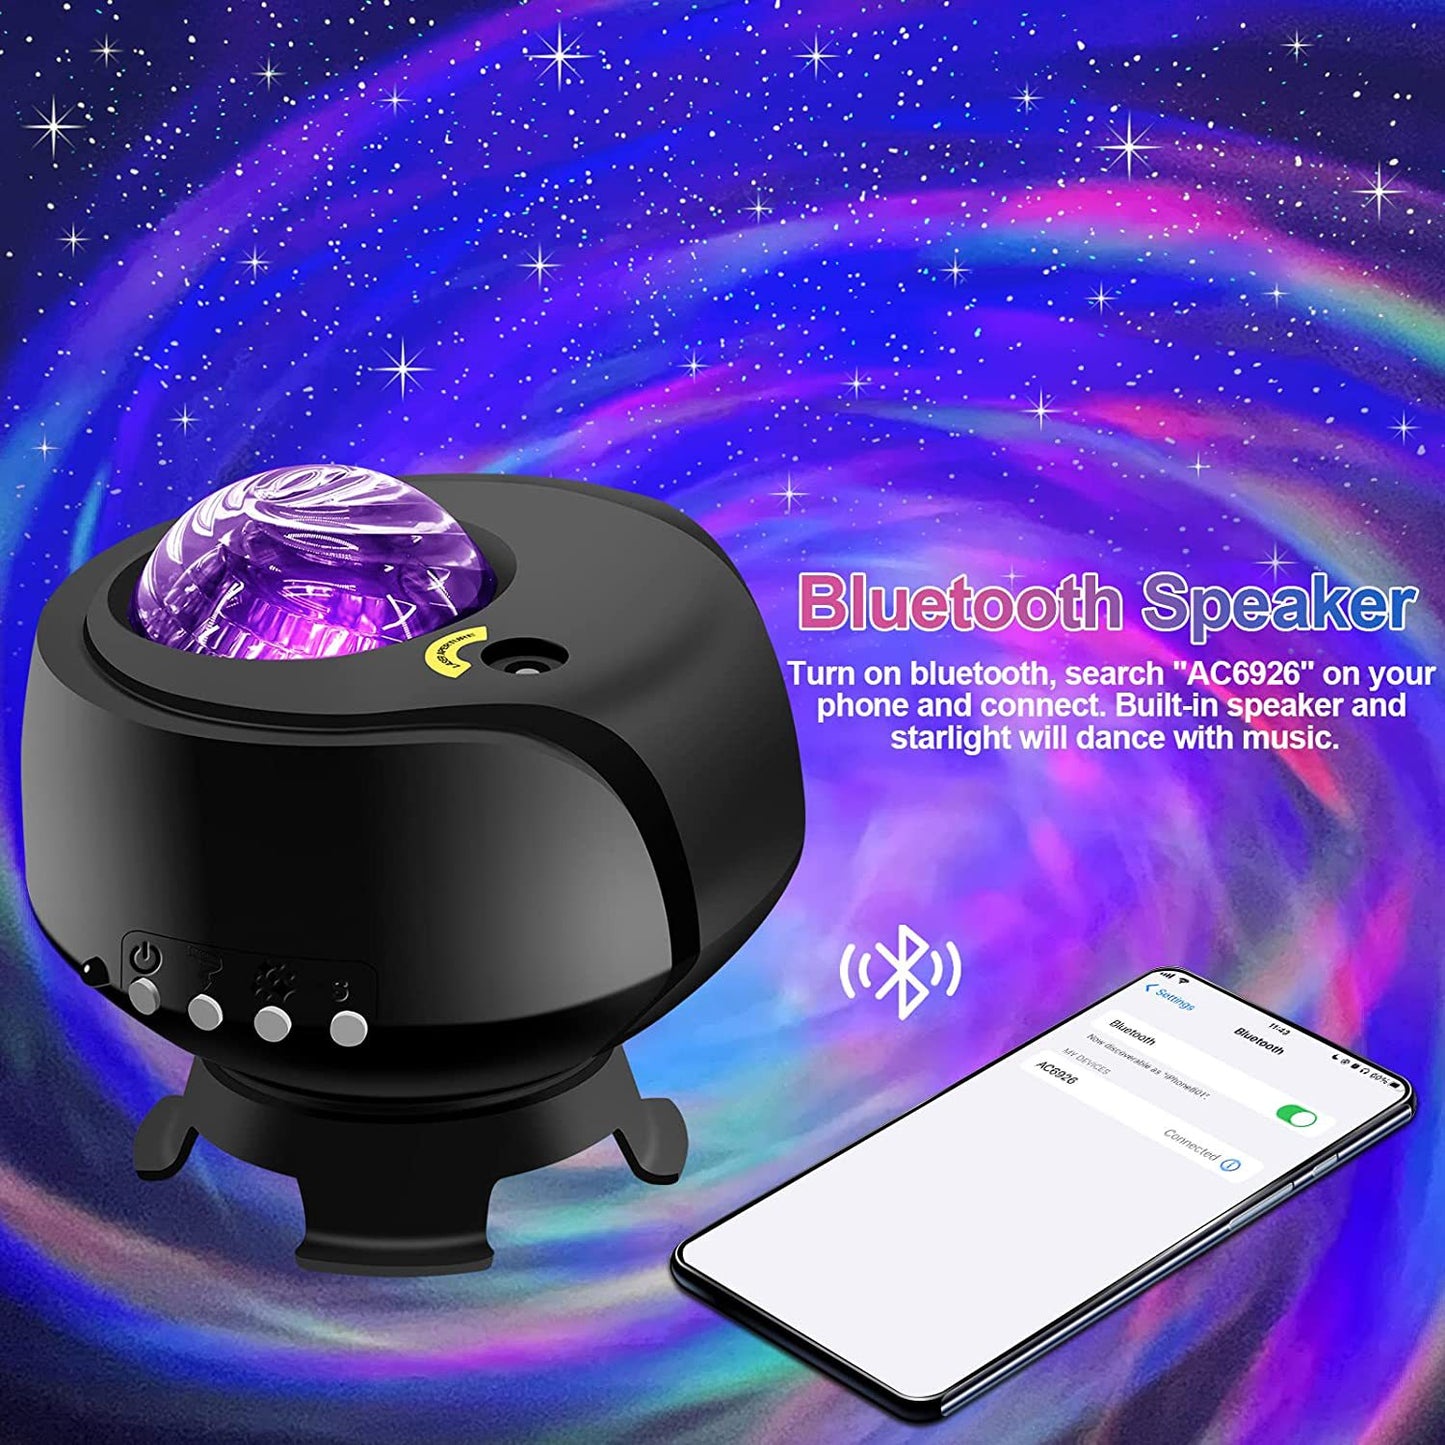 The Largest Coverage Area Galaxy Lights Projector, FLITI Star Projector, with Changing Nebula and Galaxy Shapes Galaxy Night Light